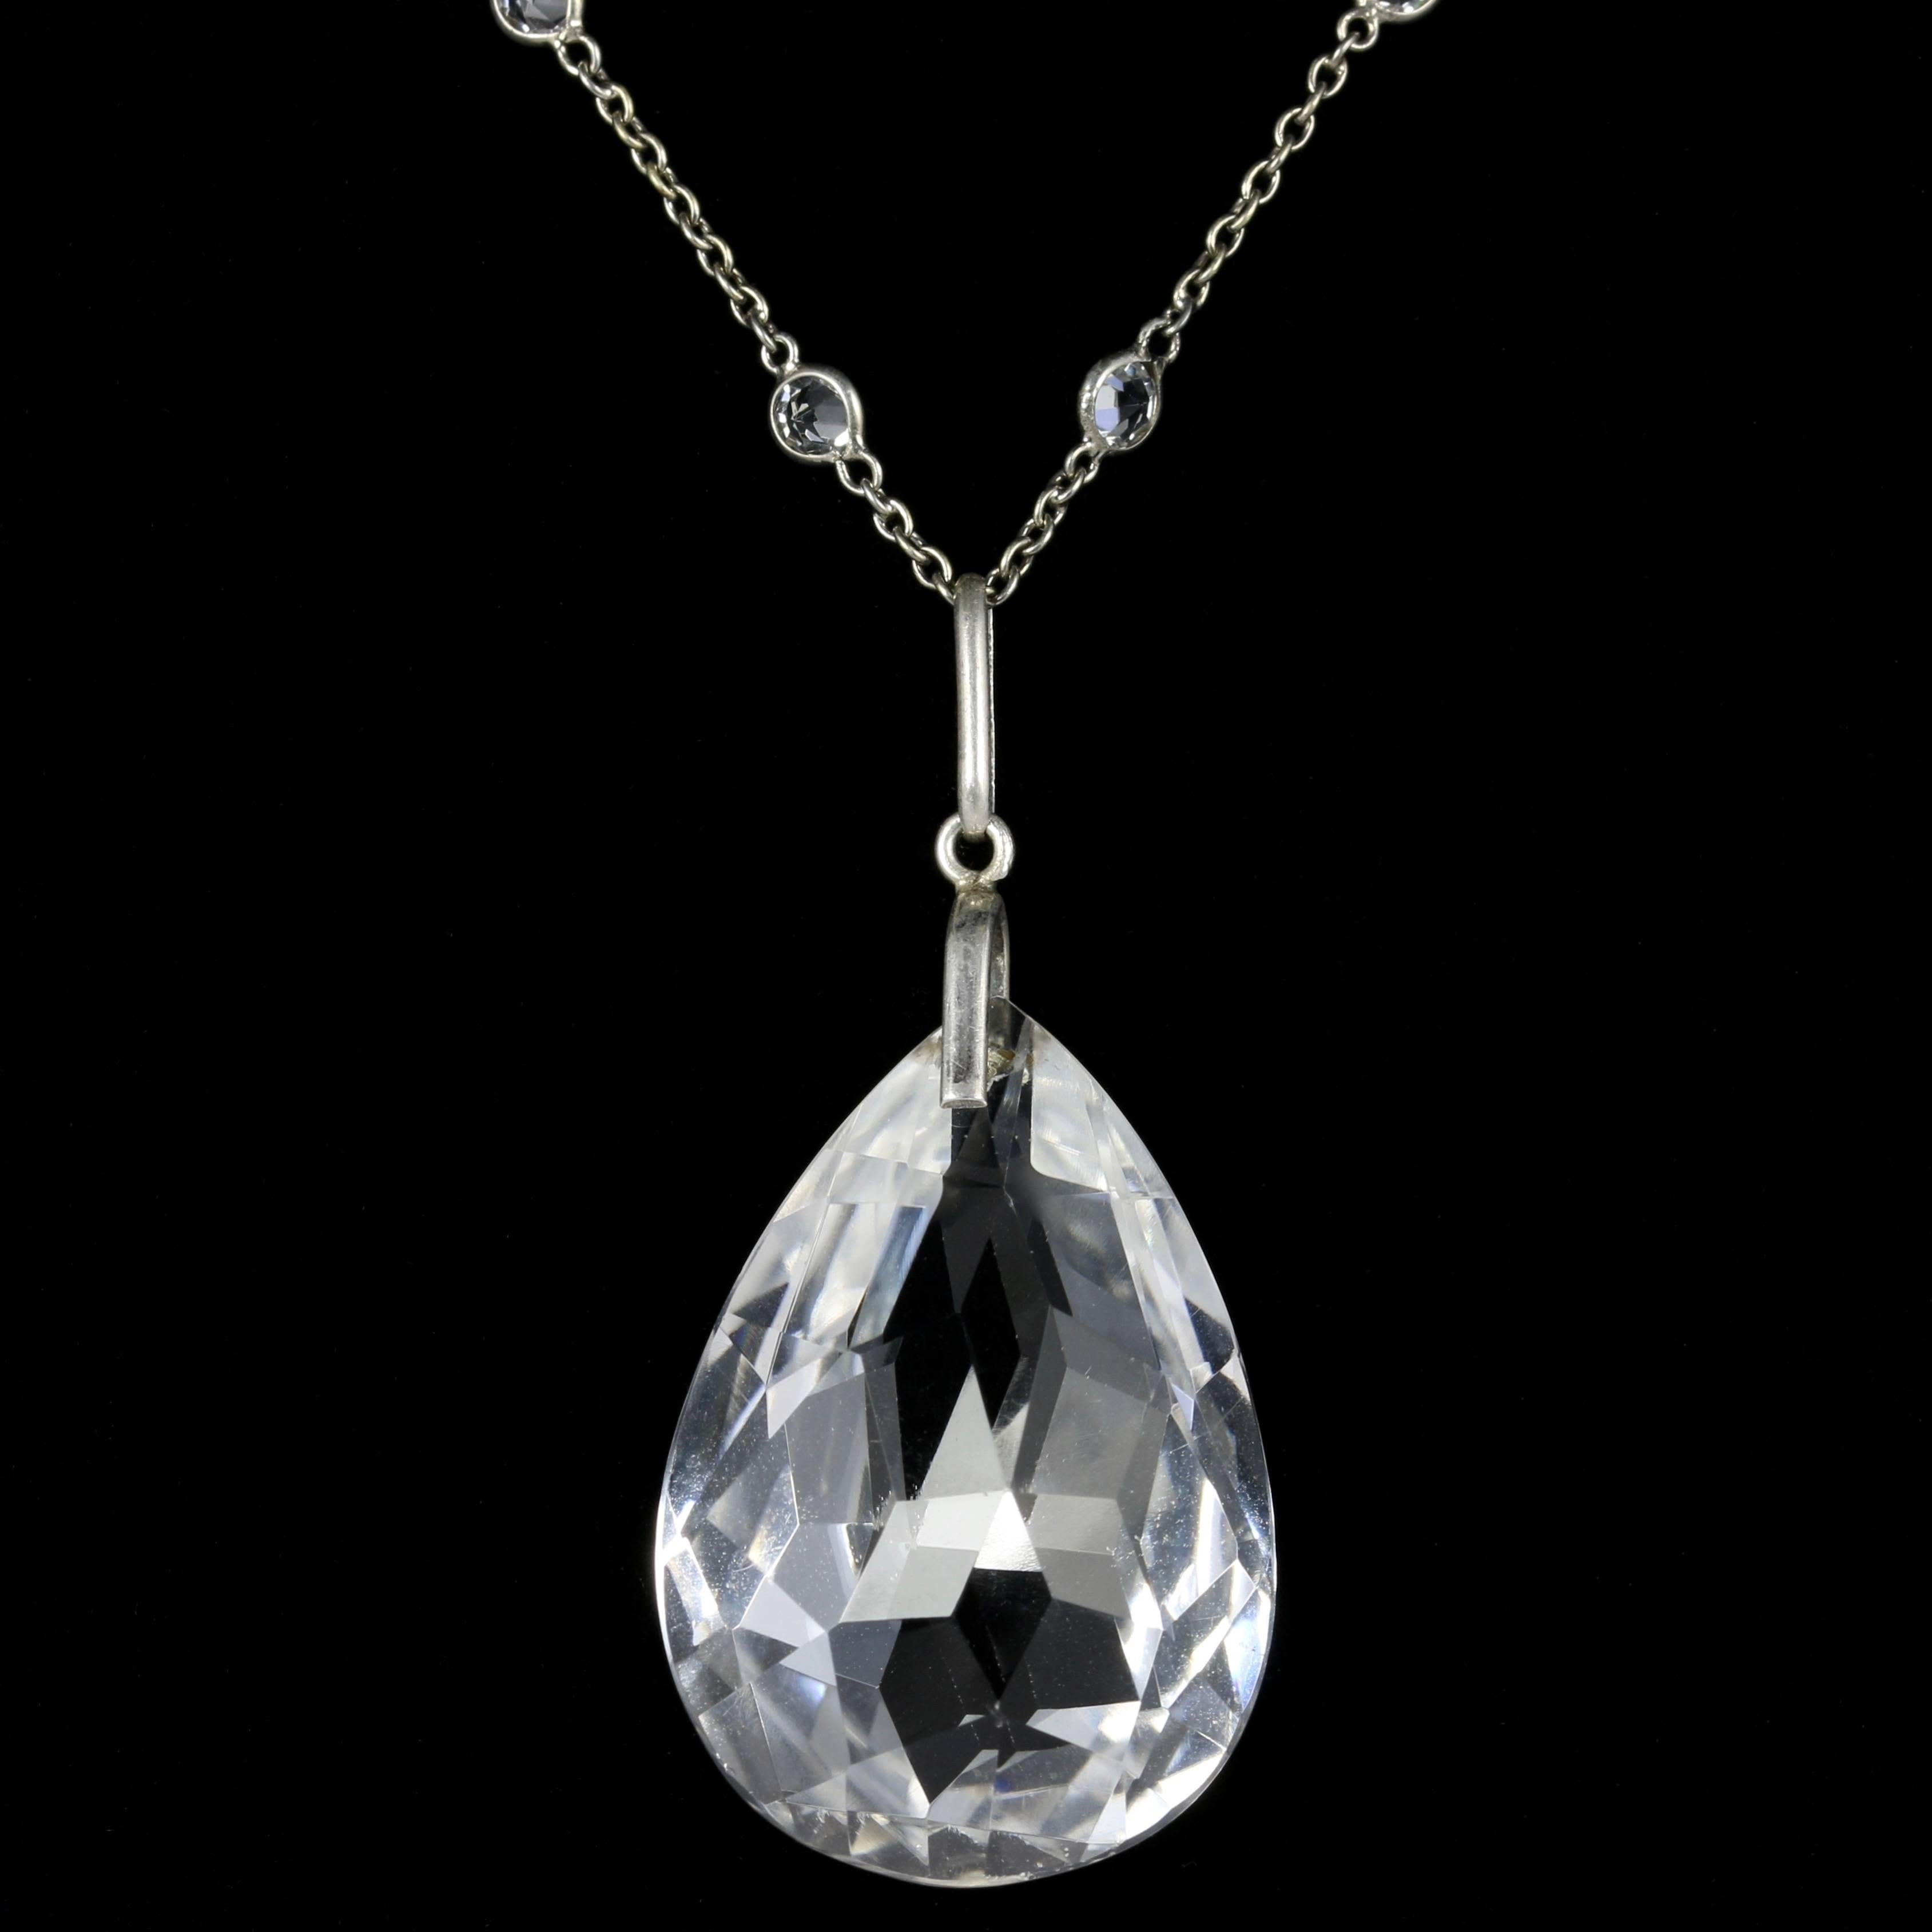 For more details please click continue reading down below..

This beautiful necklace is set with fabulous Rock Crystals all over, set in Platinon.

Circa 1930.

Set with a fabulous large briolette cut Rock Crystal dropper. Briolette means faceted